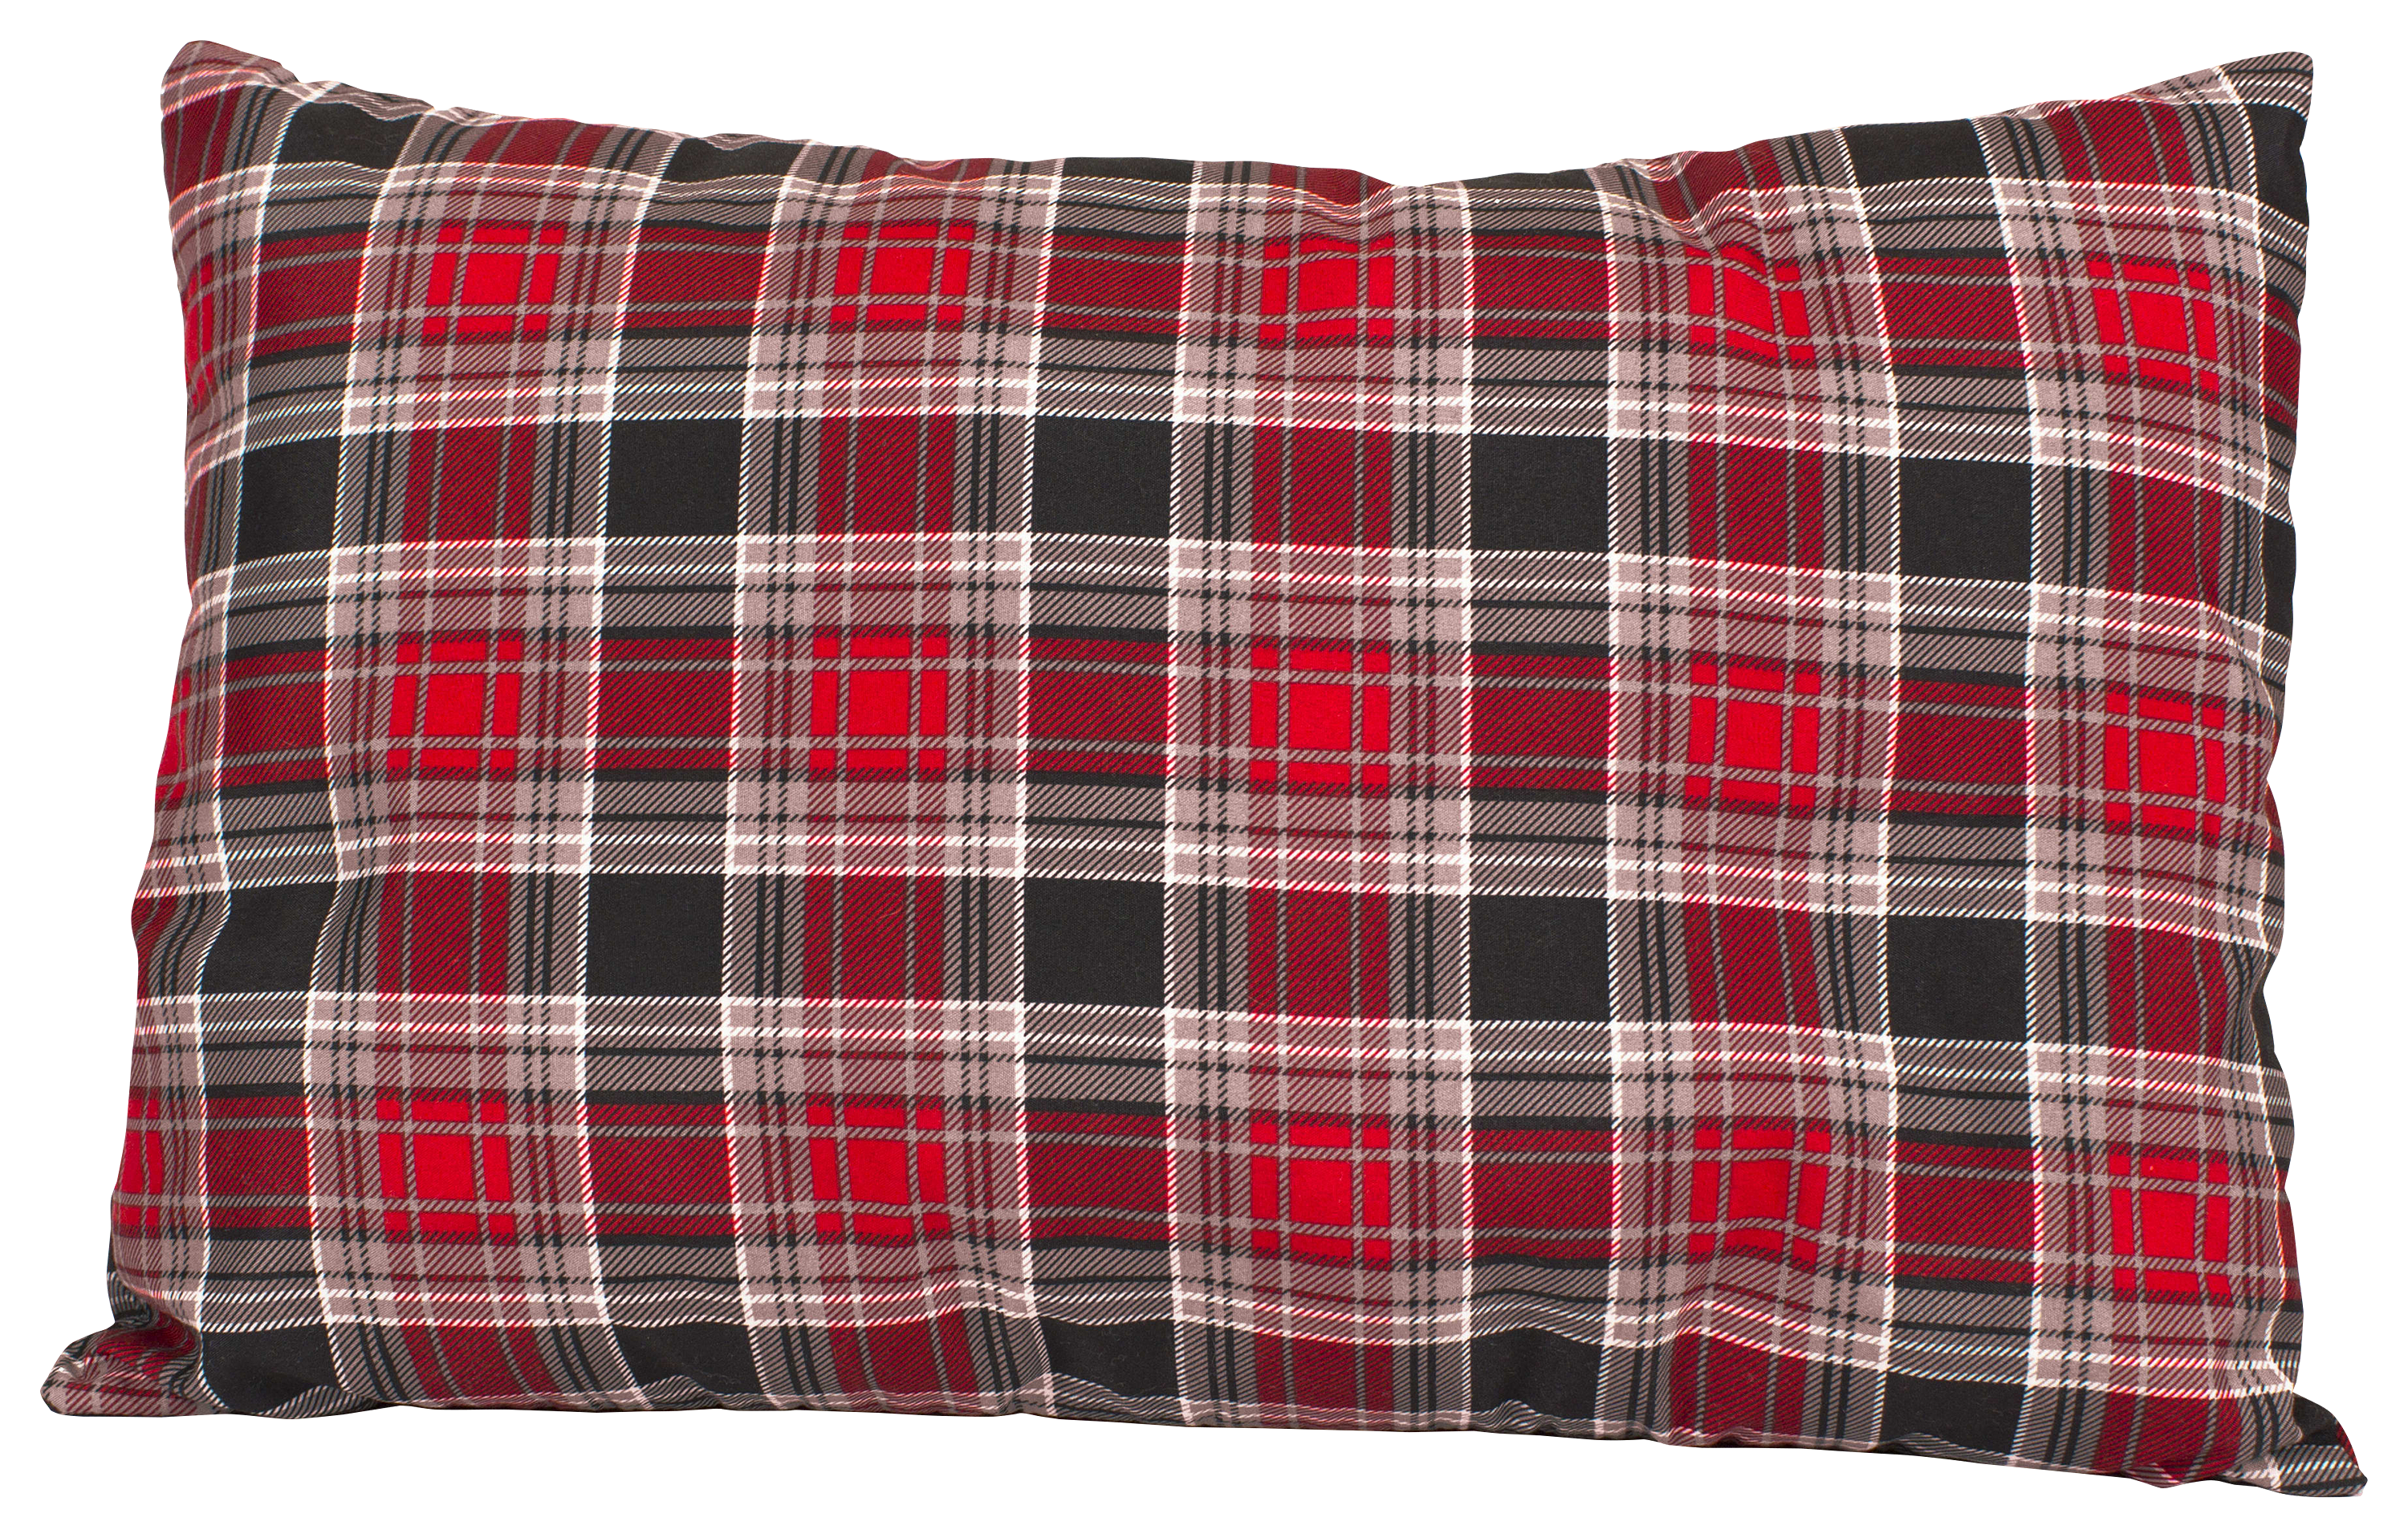 TETON Sports Camping Pillow and Pillowcase - Red/Brown Plaid